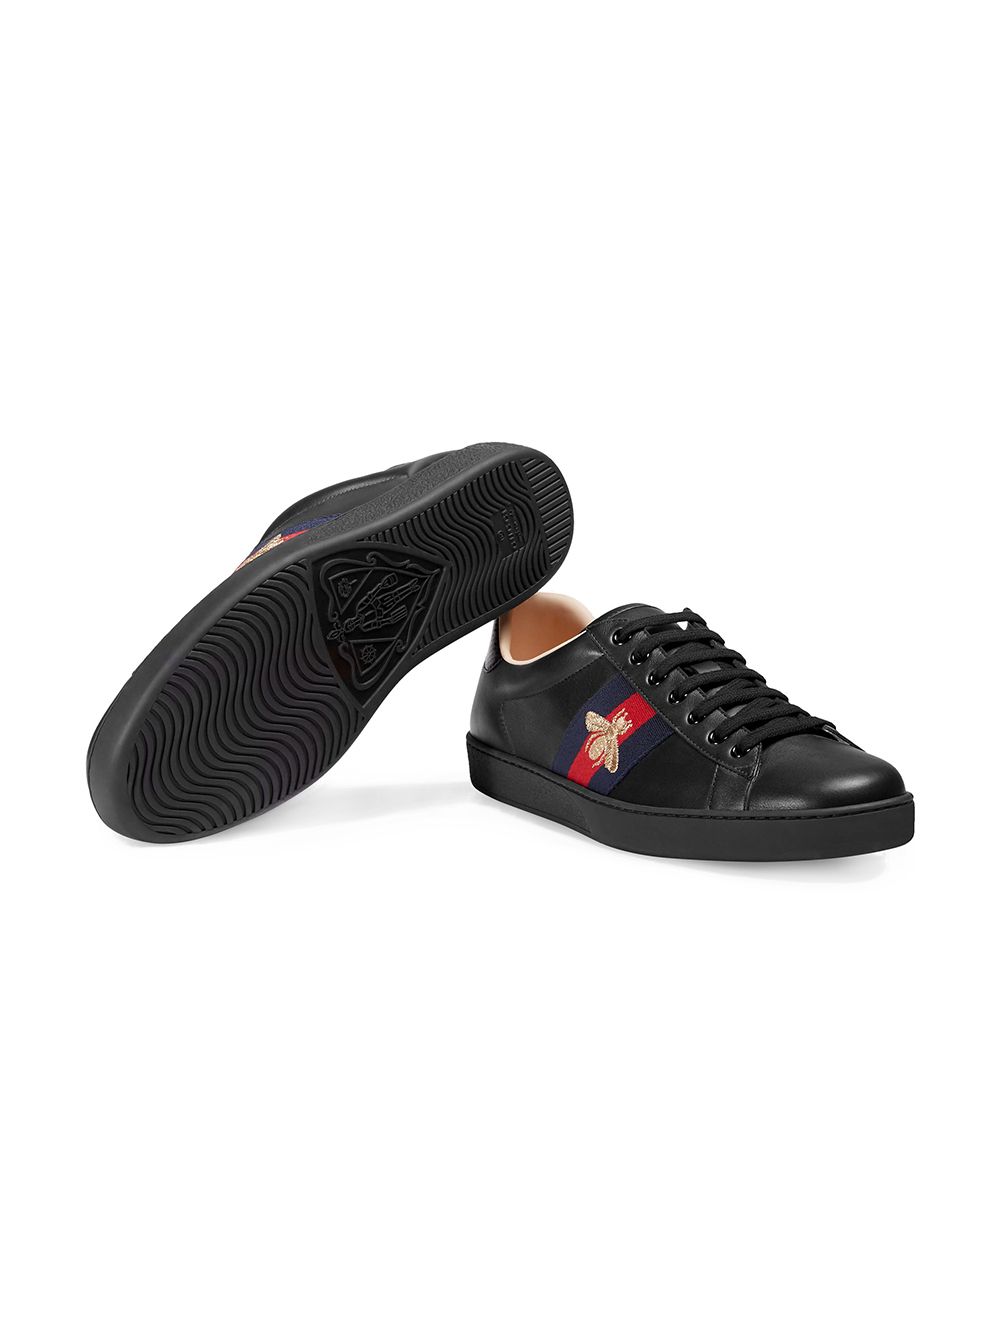 gucci ace embroidered sneaker black